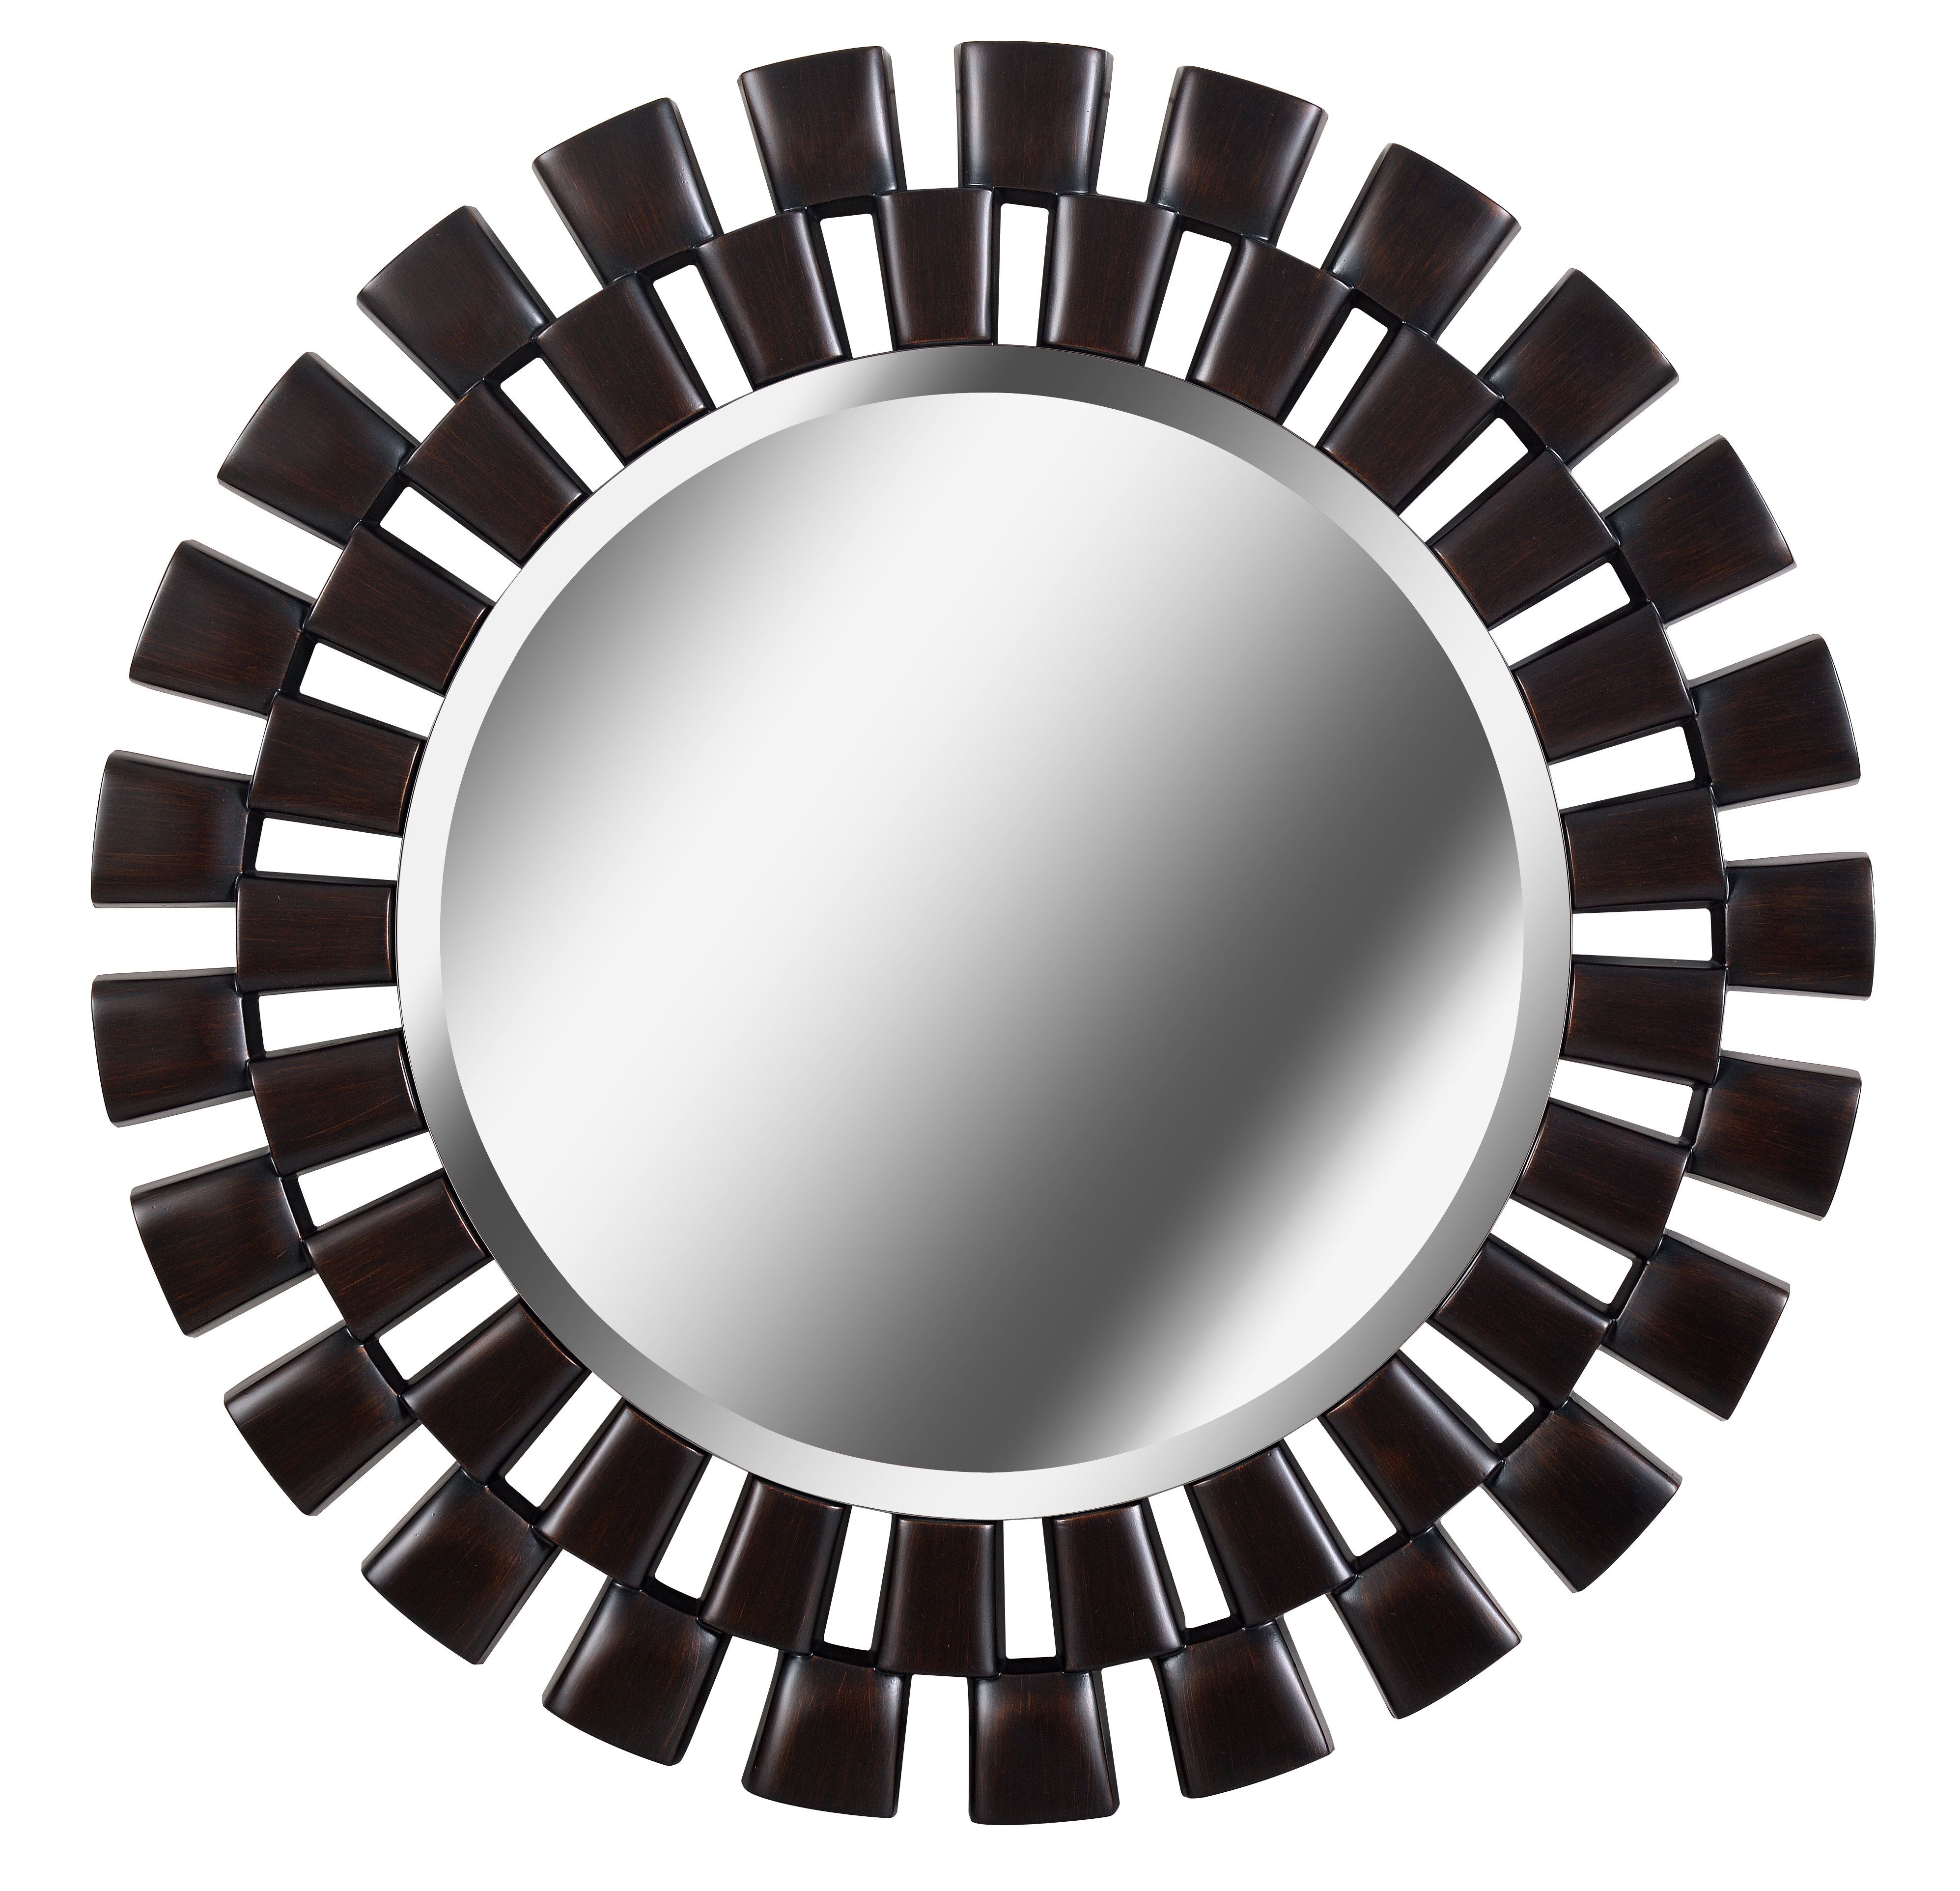 Glam Beveled Accent Mirror Pertaining To Glam Beveled Accent Mirrors (View 7 of 30)